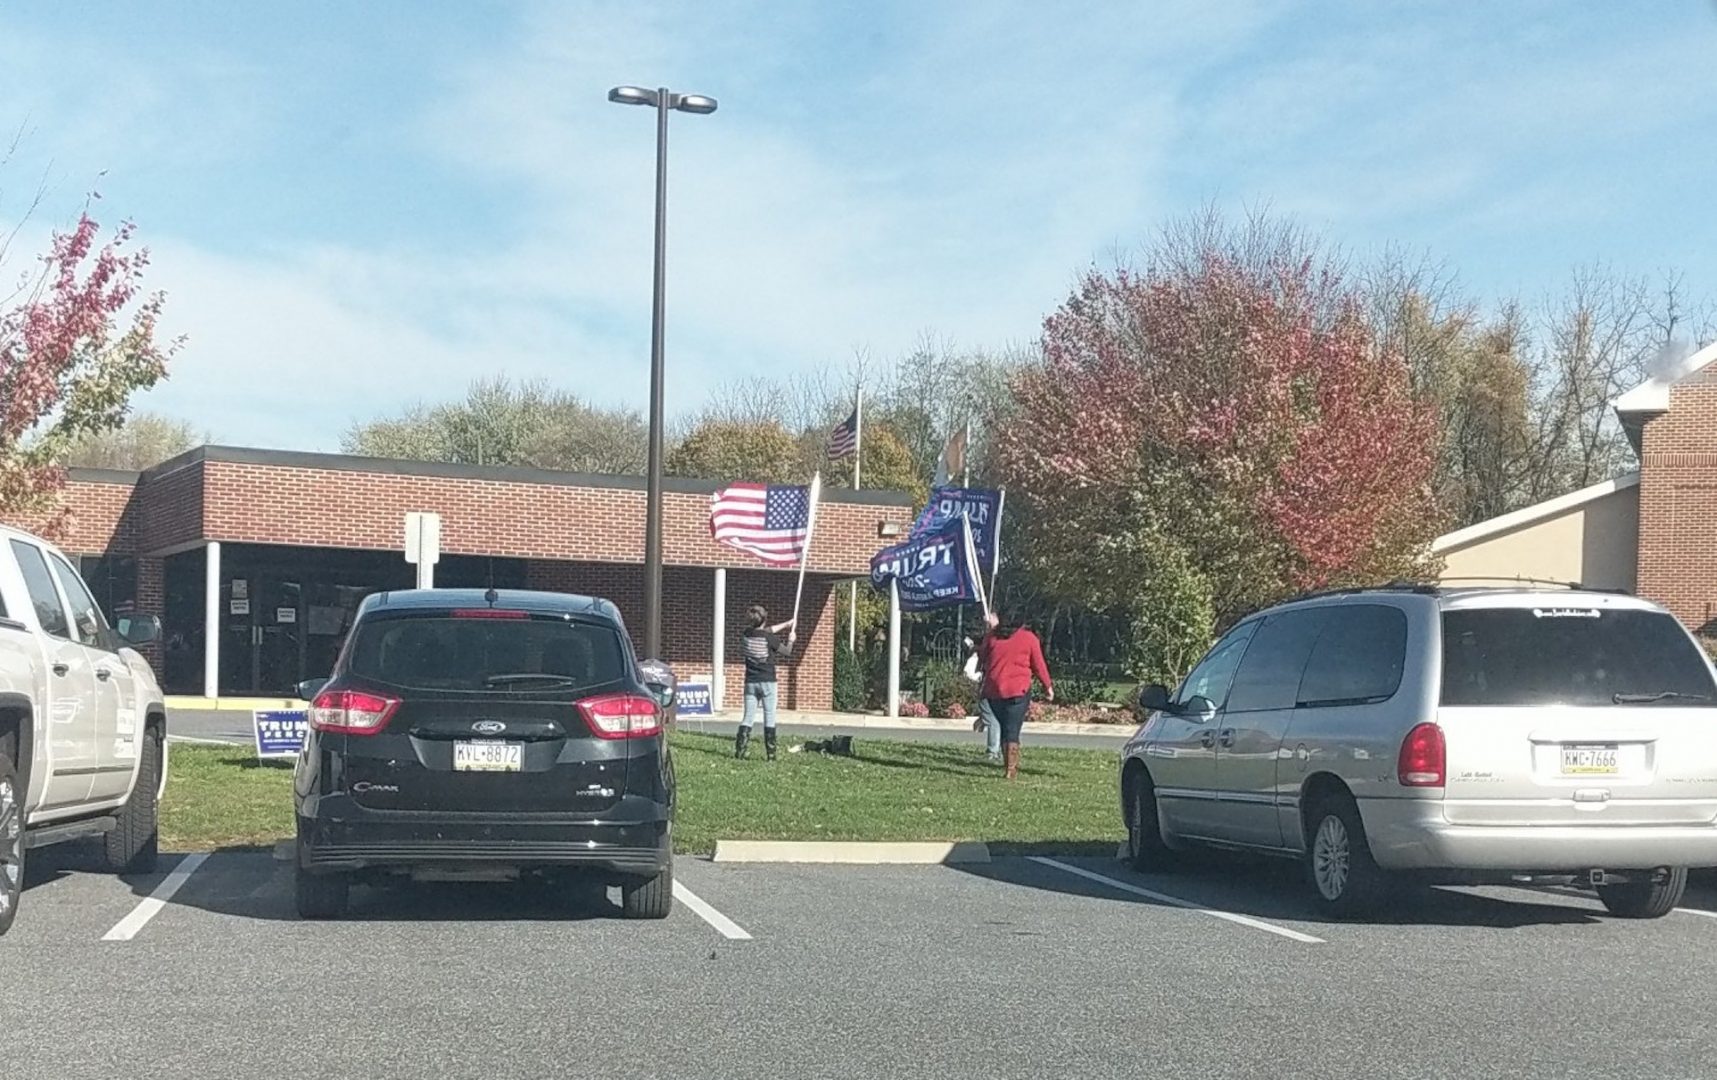 Three people showed support for President Donald Trump by playing music and recordings of his voice in the parking lot of a polling place at Sacred Heart Parish Center in Cornwall, Lebanon County, on Nov. 3, 2020.